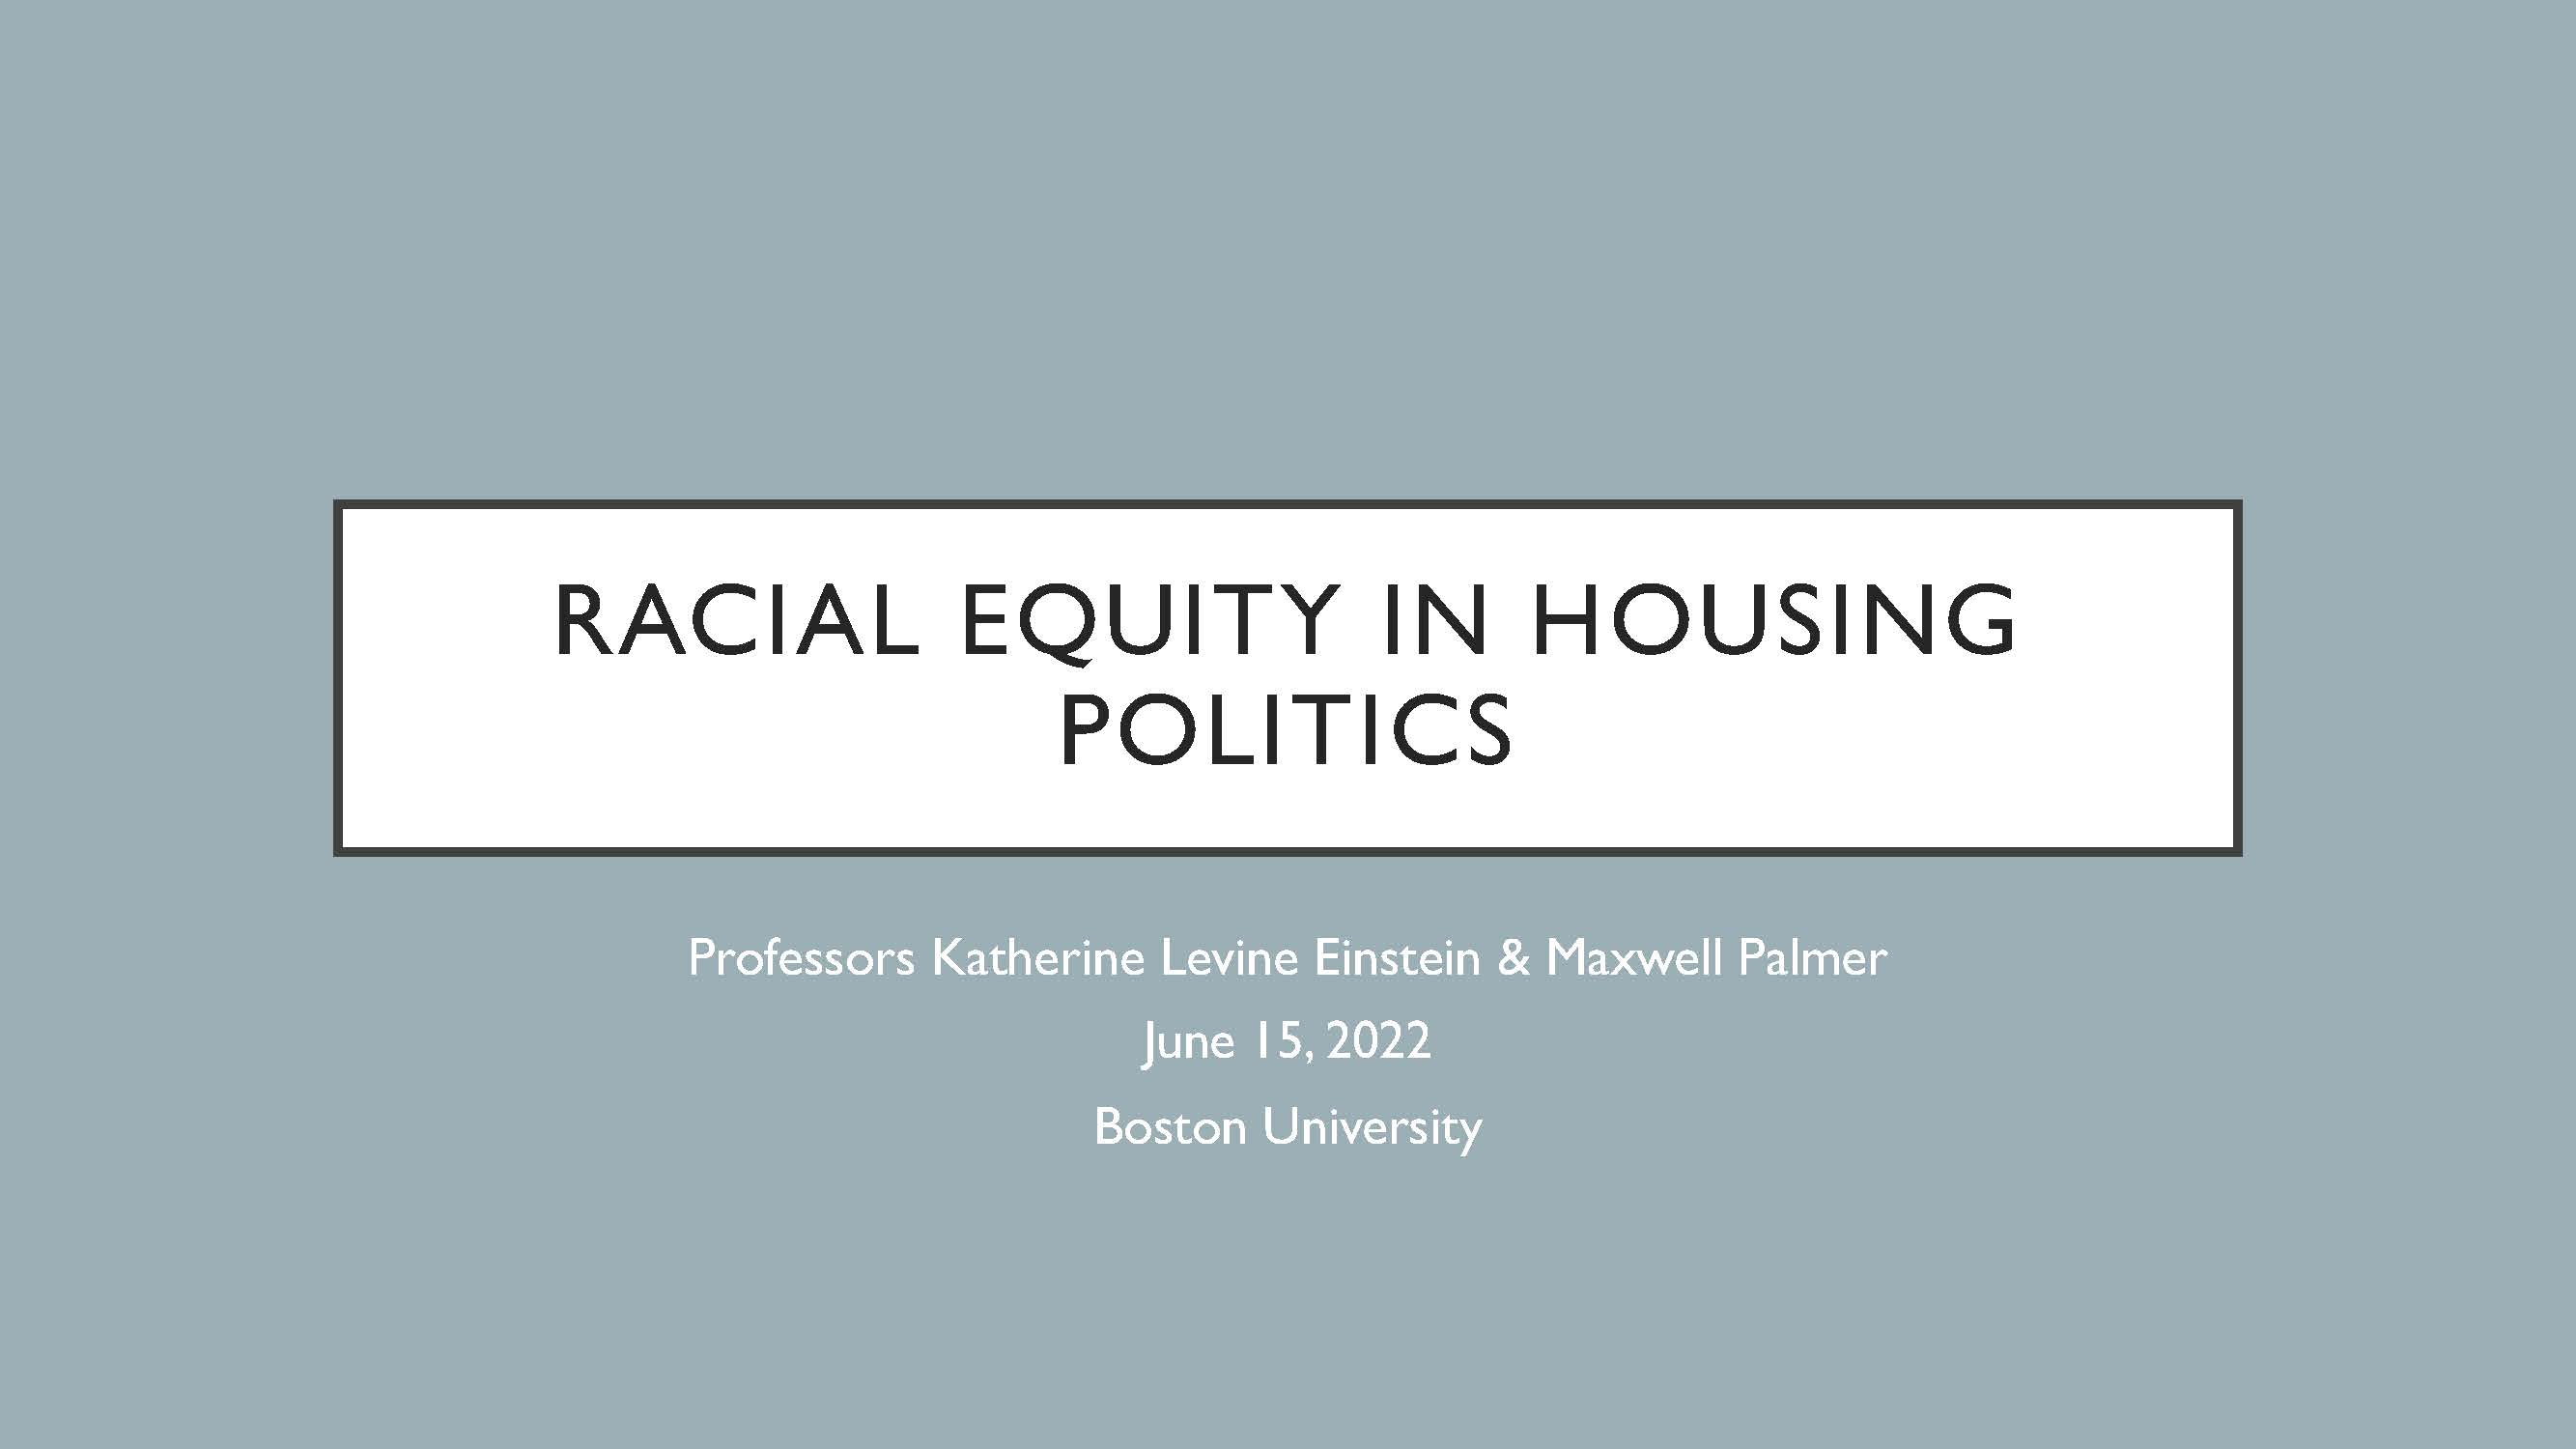 A title slide for Representation in Housing report release event